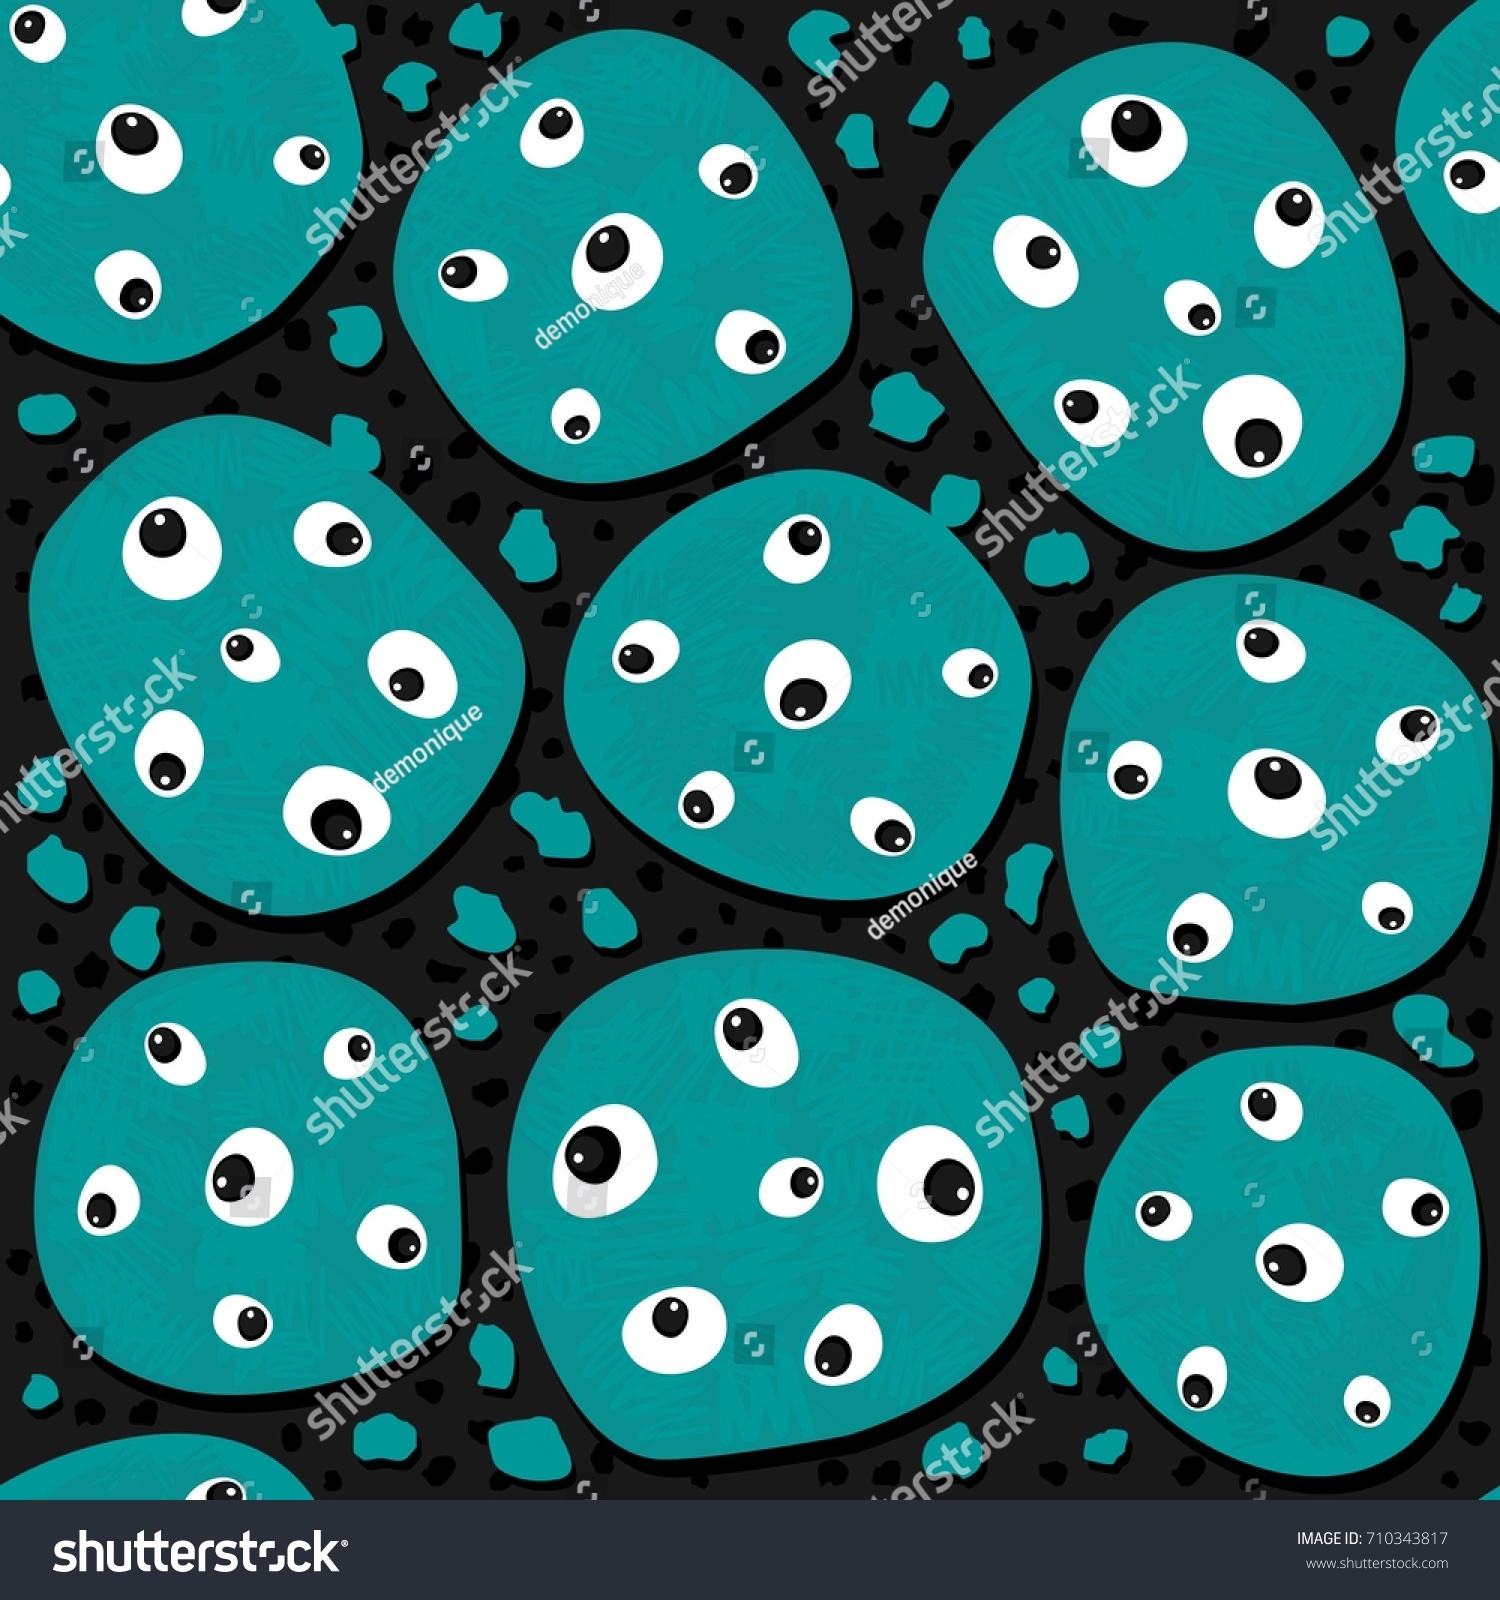 SVG of messy seasonal halloween seamless pattern with turquoise monster cookies with eyes on dark background svg